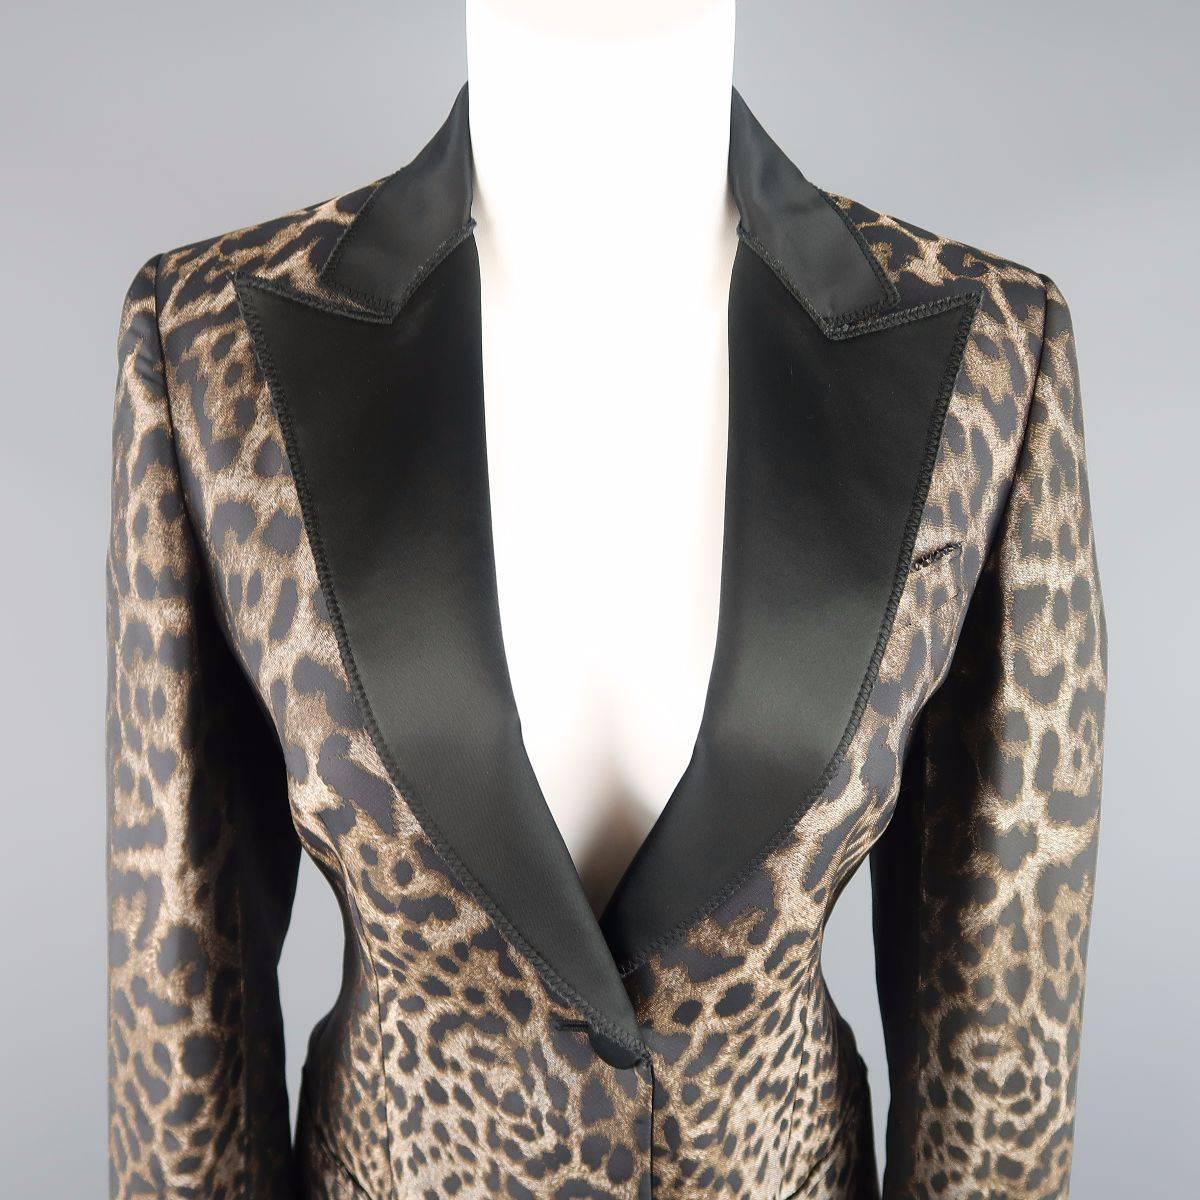 LANVIN tuxedo style jacket comes in a dark taupe beige leopard cheetah print silk blend fabric and features a black satin peak lapel, single button closure, and raw edge detailed pockets. Made in Italy. Fall 2013.
 
Excellent Pre-Owned